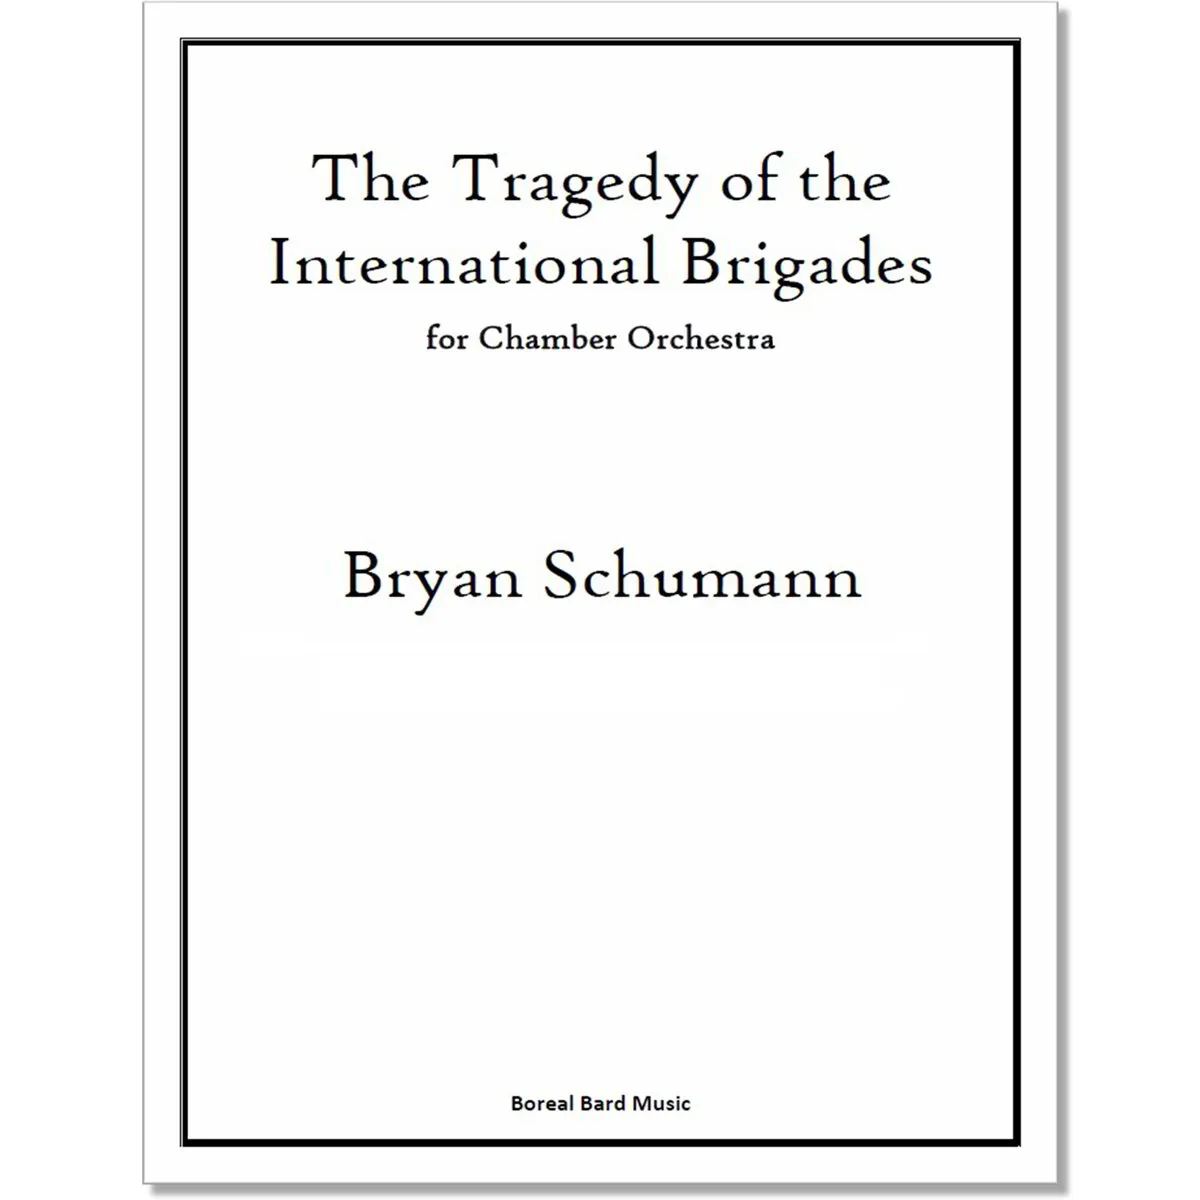 The Tragedy of the International Brigades for Chamber Orchestra (sheet music)